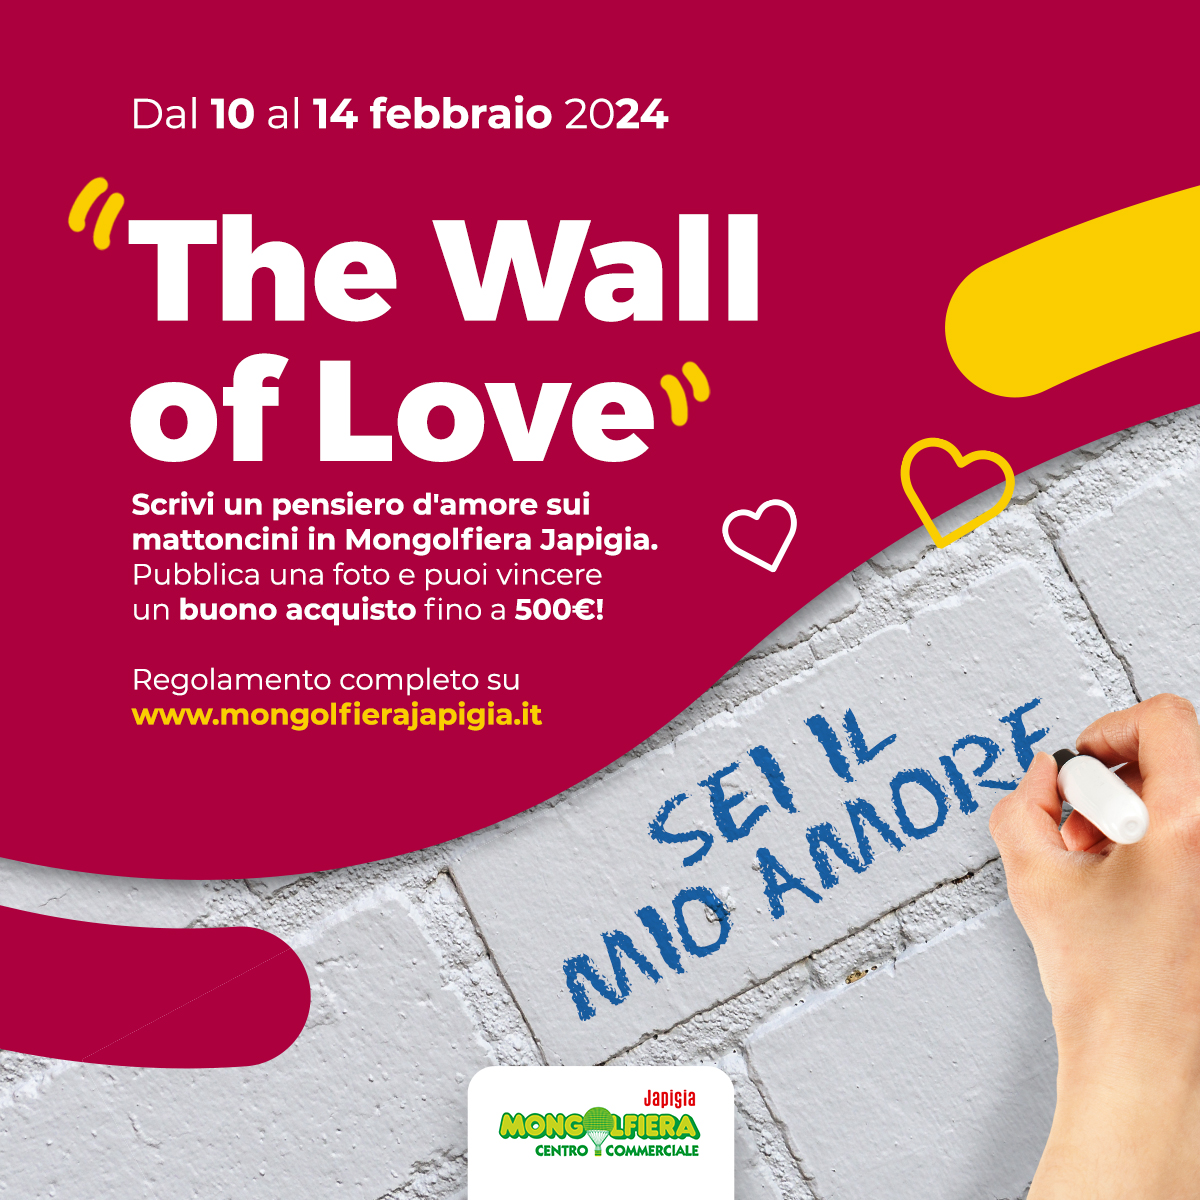 The wall of love